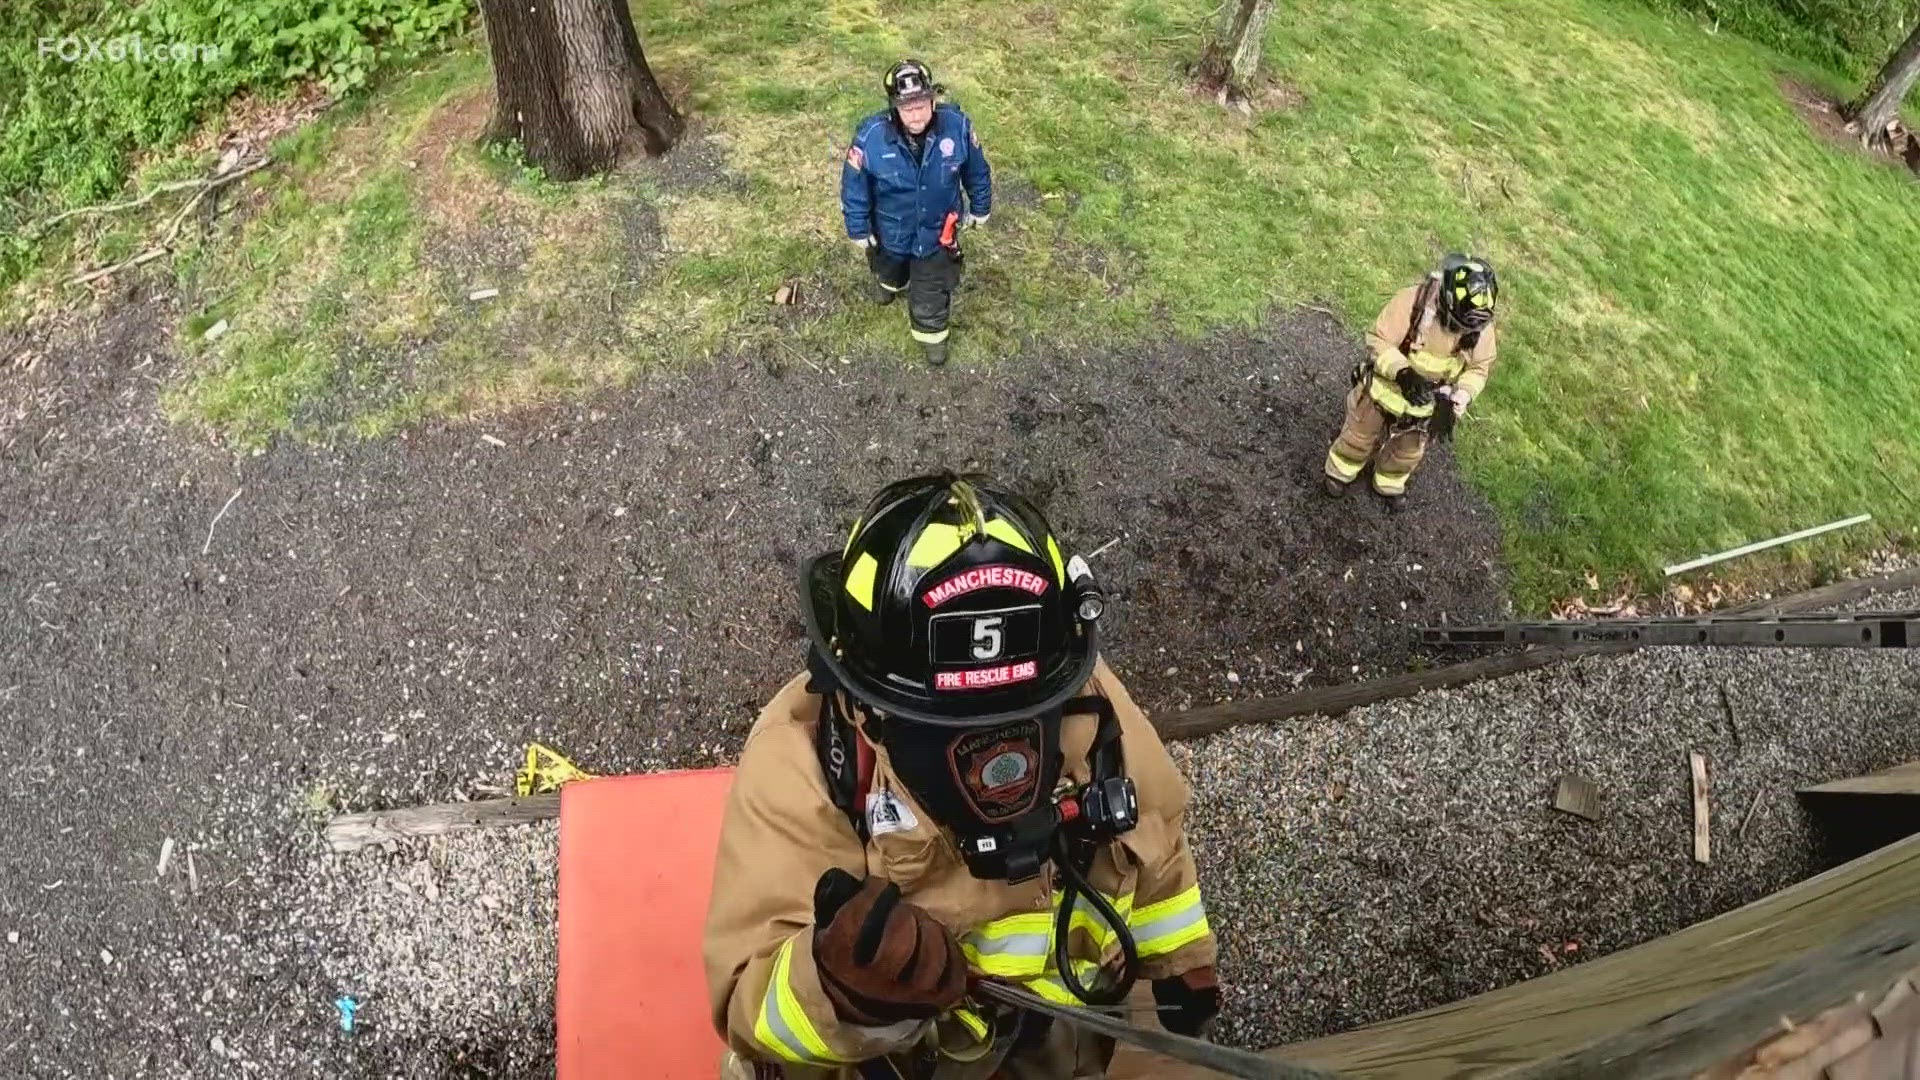 A department initiative has firefighters using the personal escape systems.